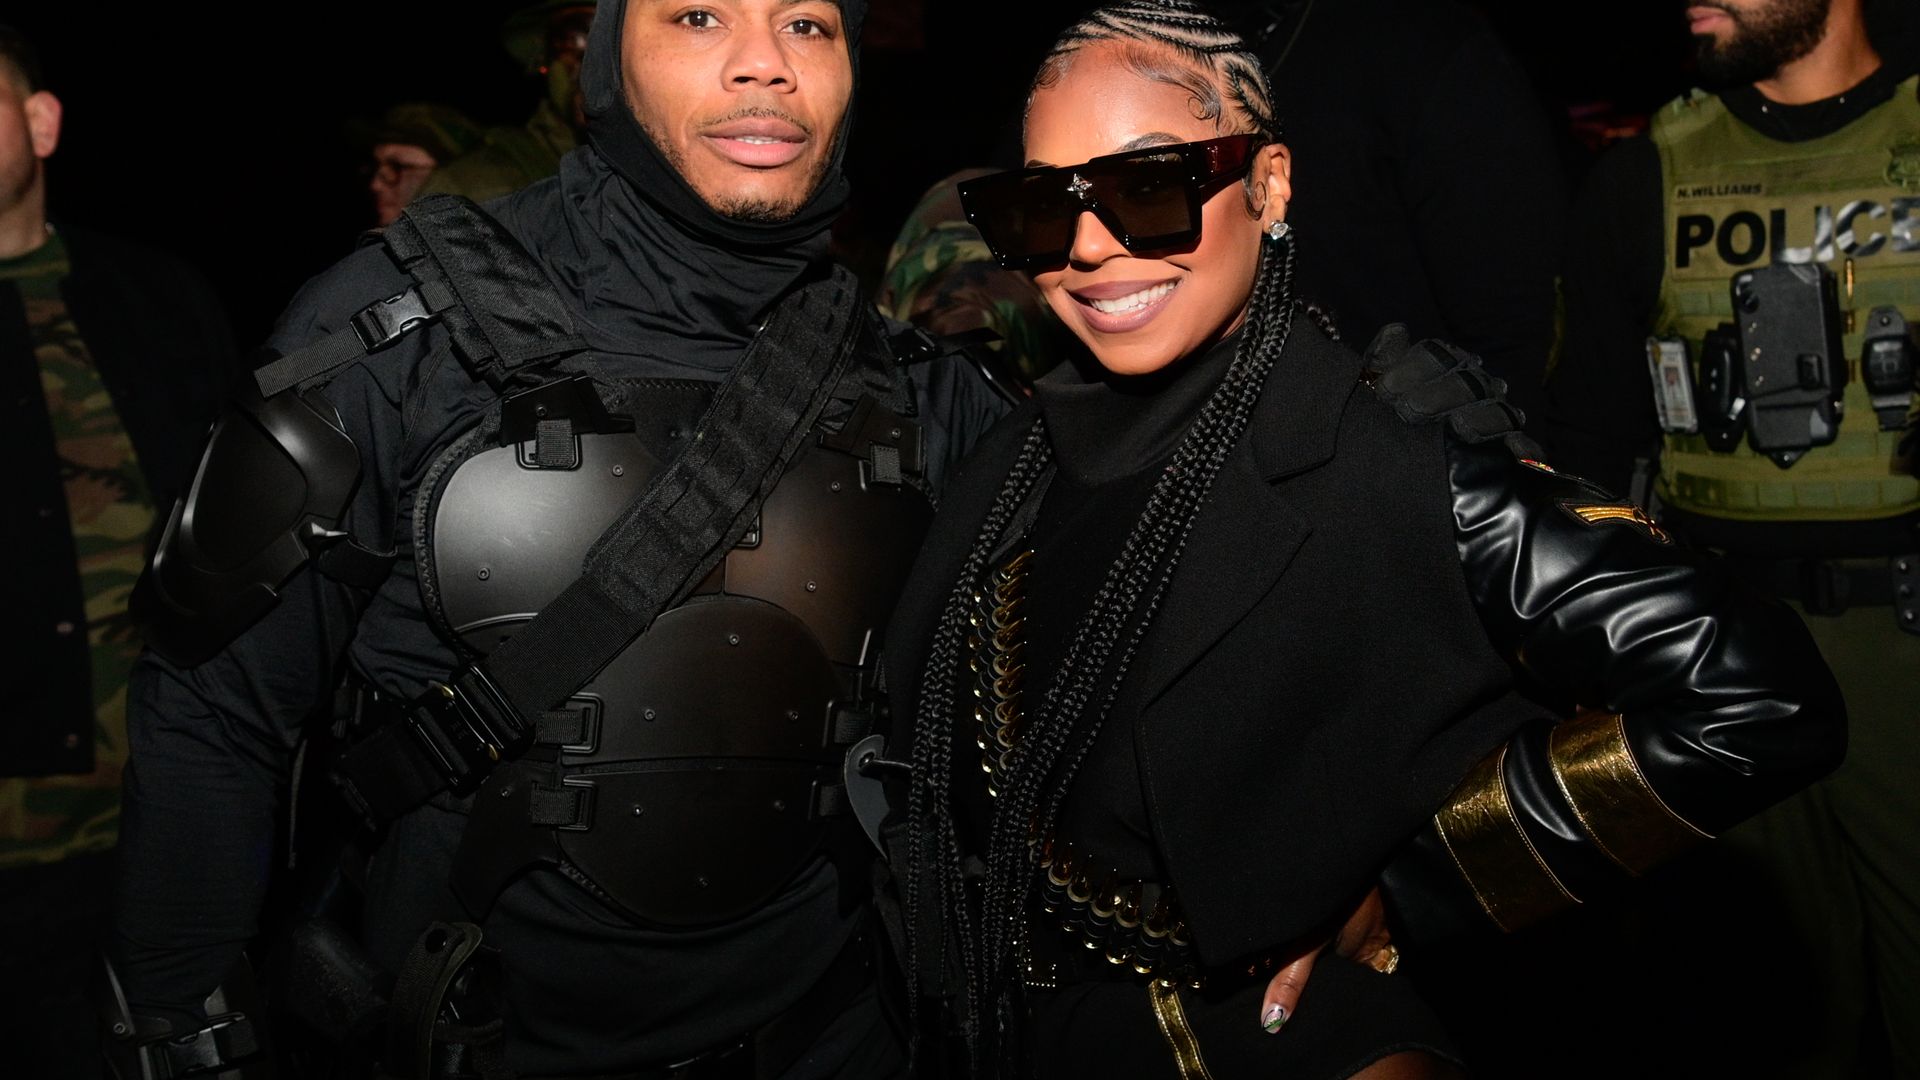 Ashanti's breakup with Nelly prior to pregnancy reveal uncovered